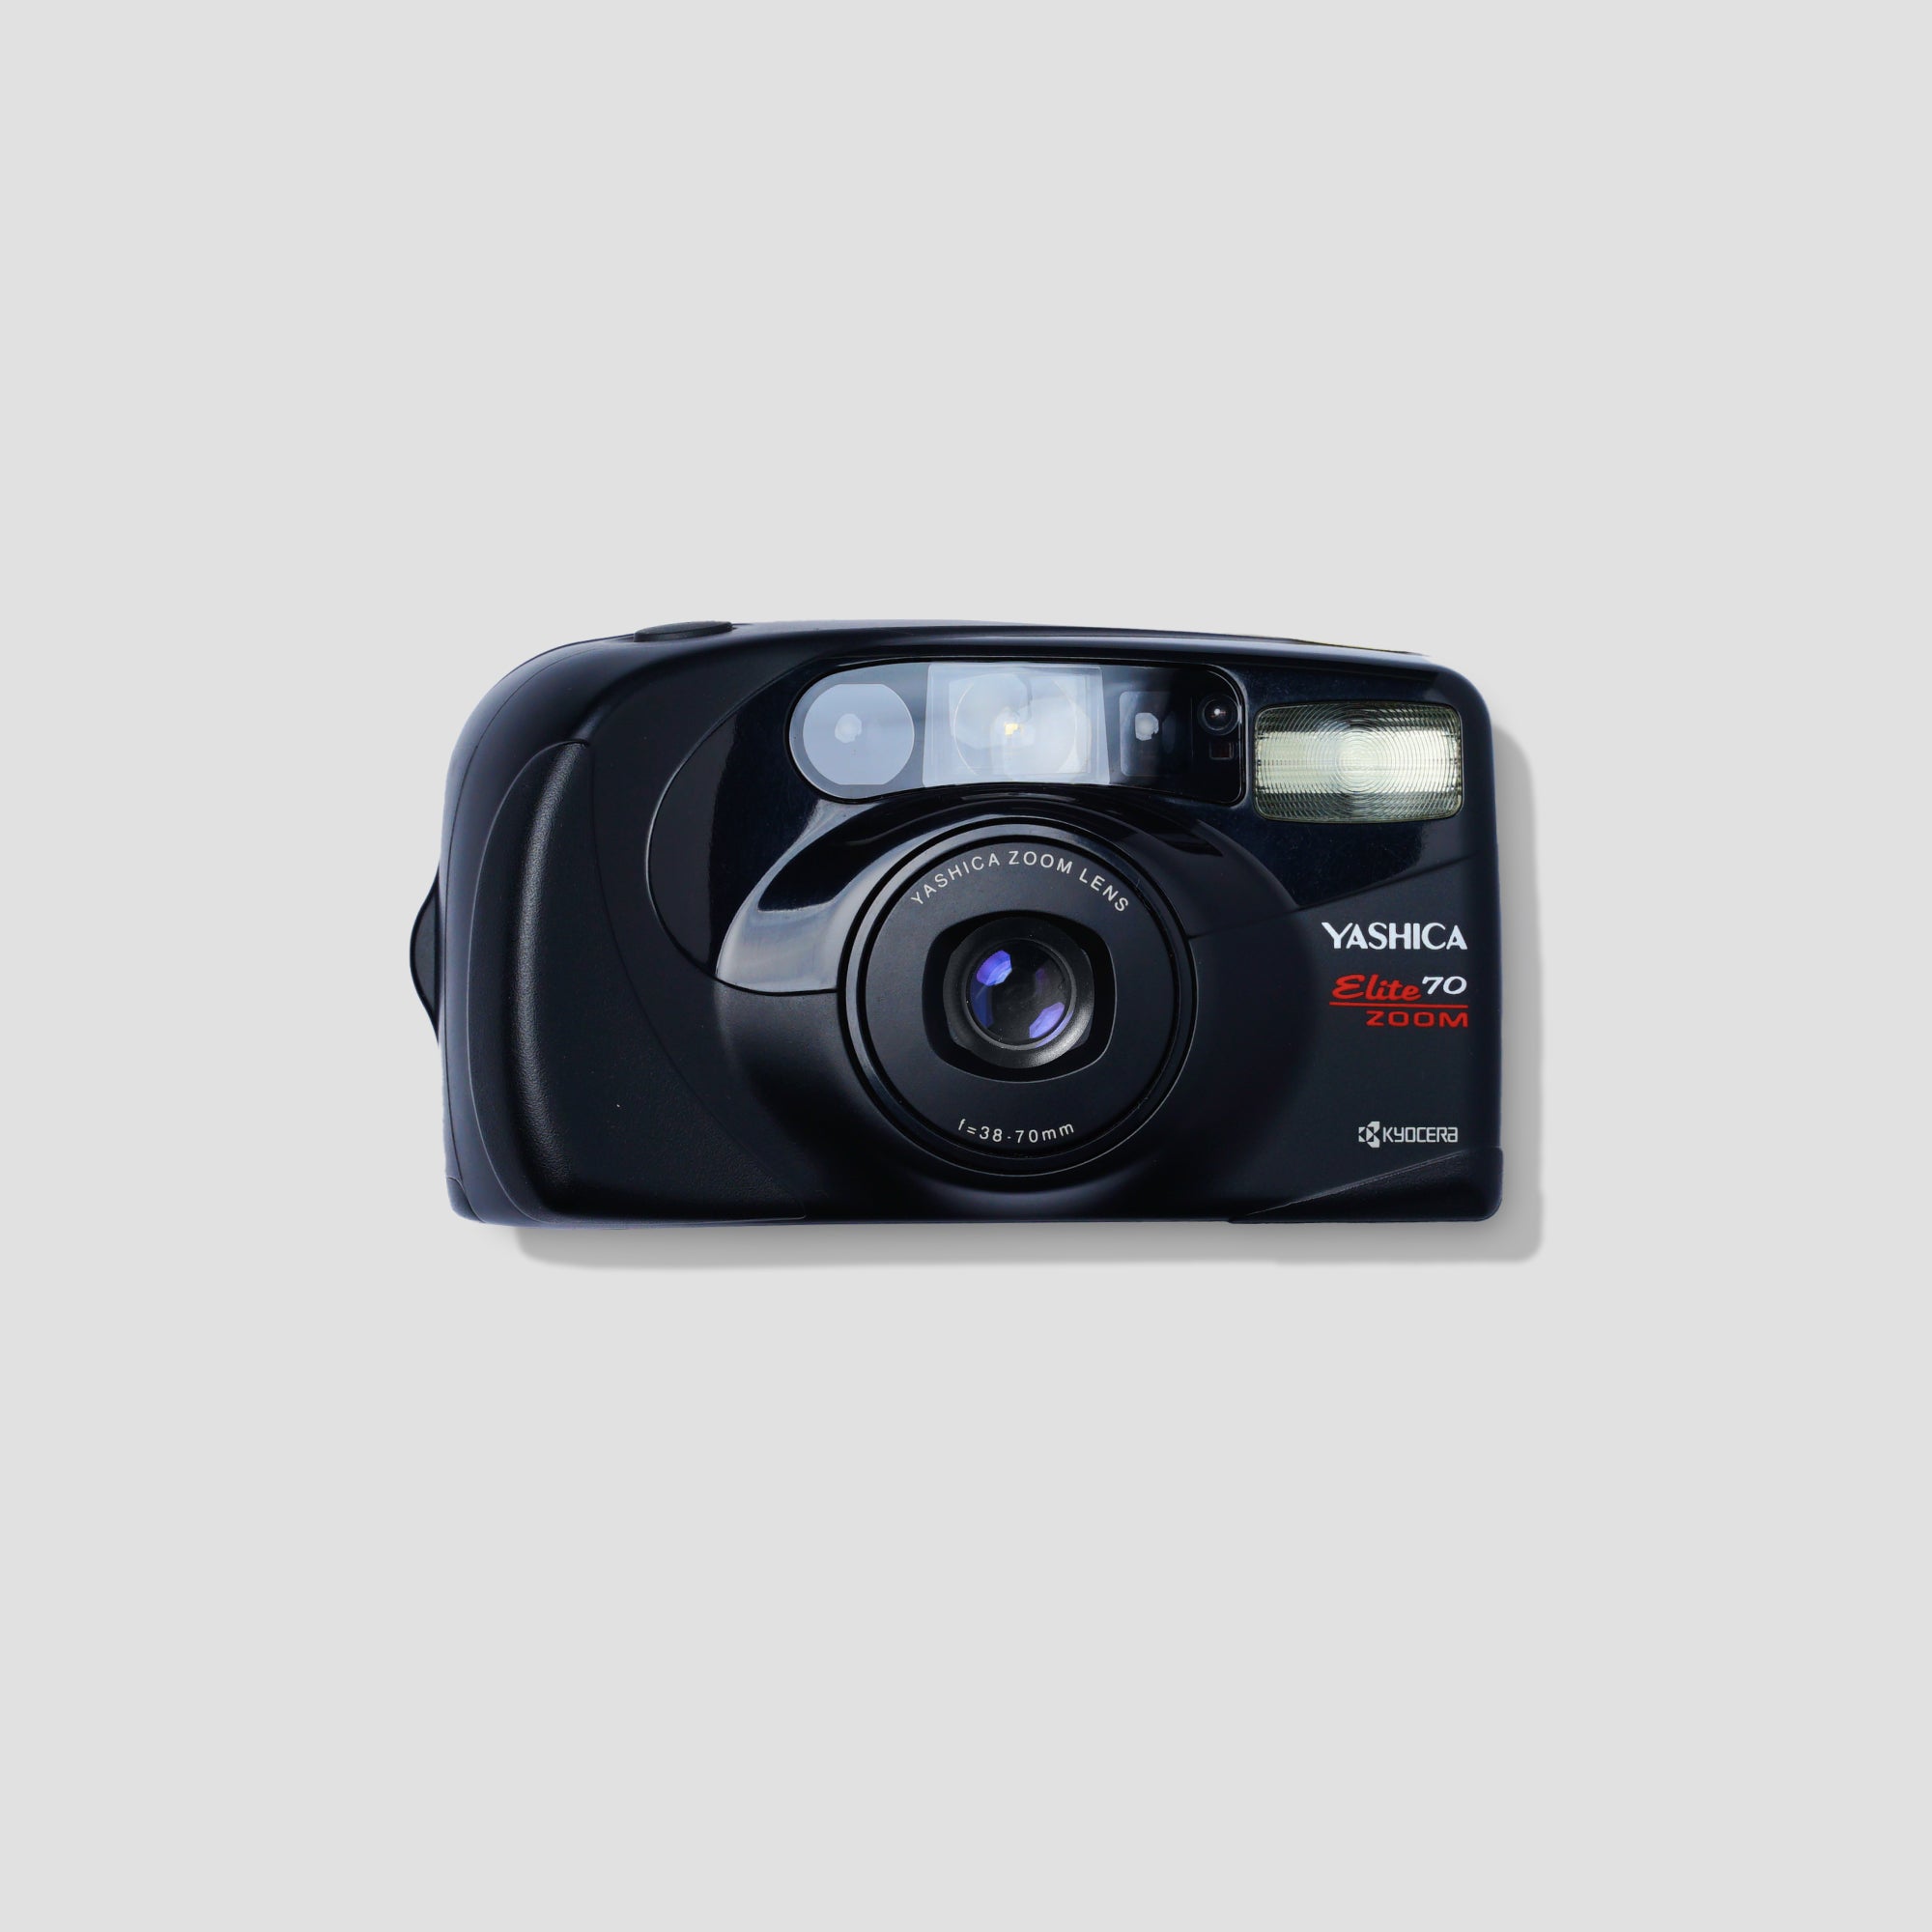 Buy Yashica Elite 70 Zoom now at Analogue Amsterdam